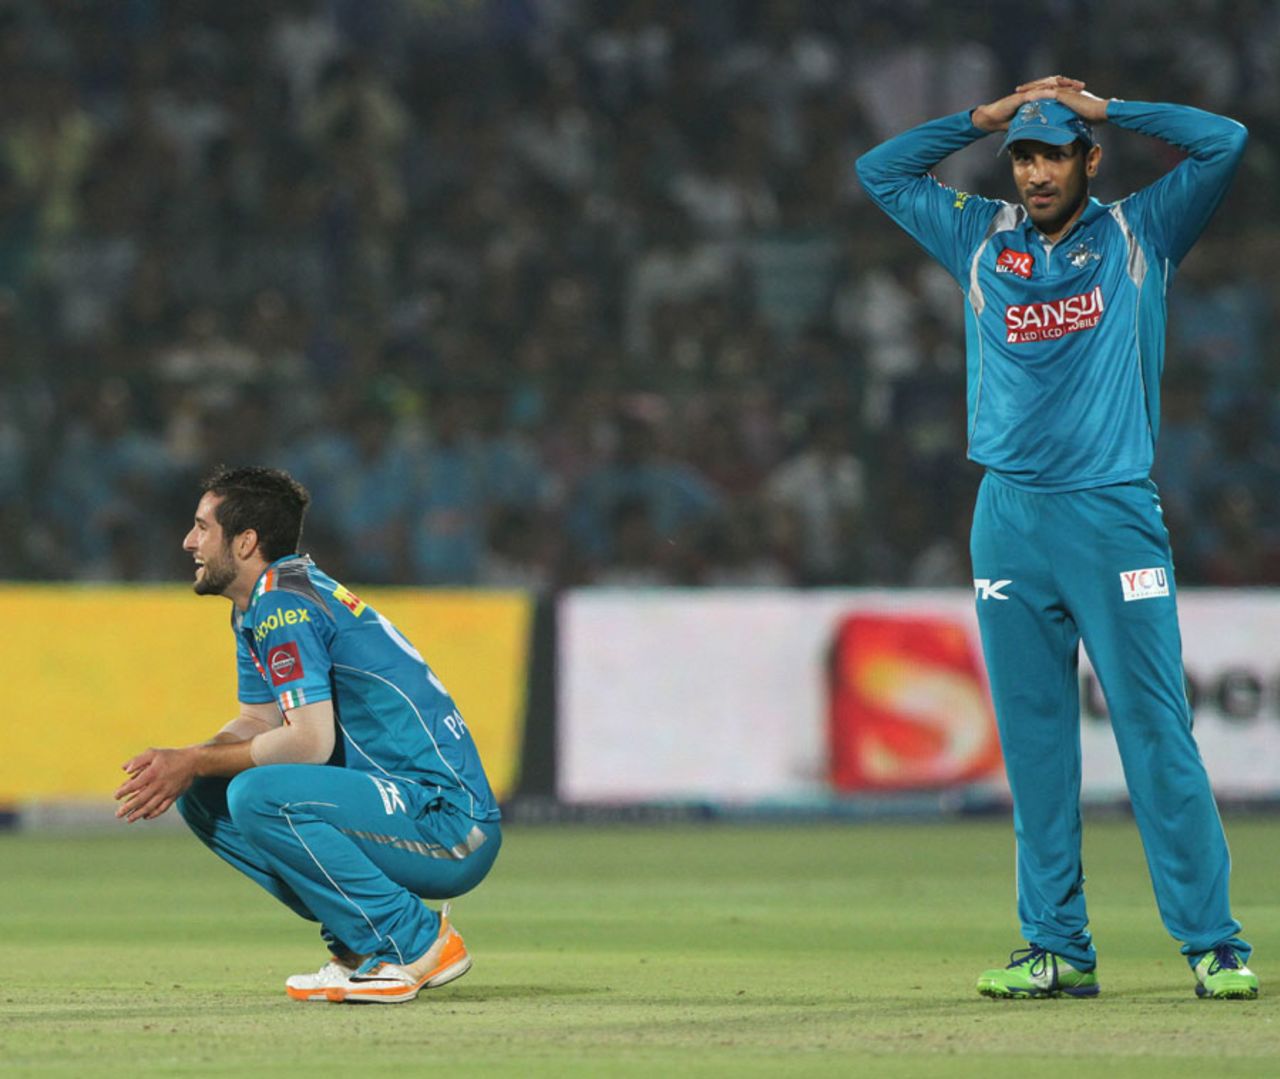 Wayne Parnell and Udit Birla are disappointed after missing an run-out chance in the last over, Rajasthan Royals v Pune Warriors, IPL 2013, Jaipur, May 5, 2013